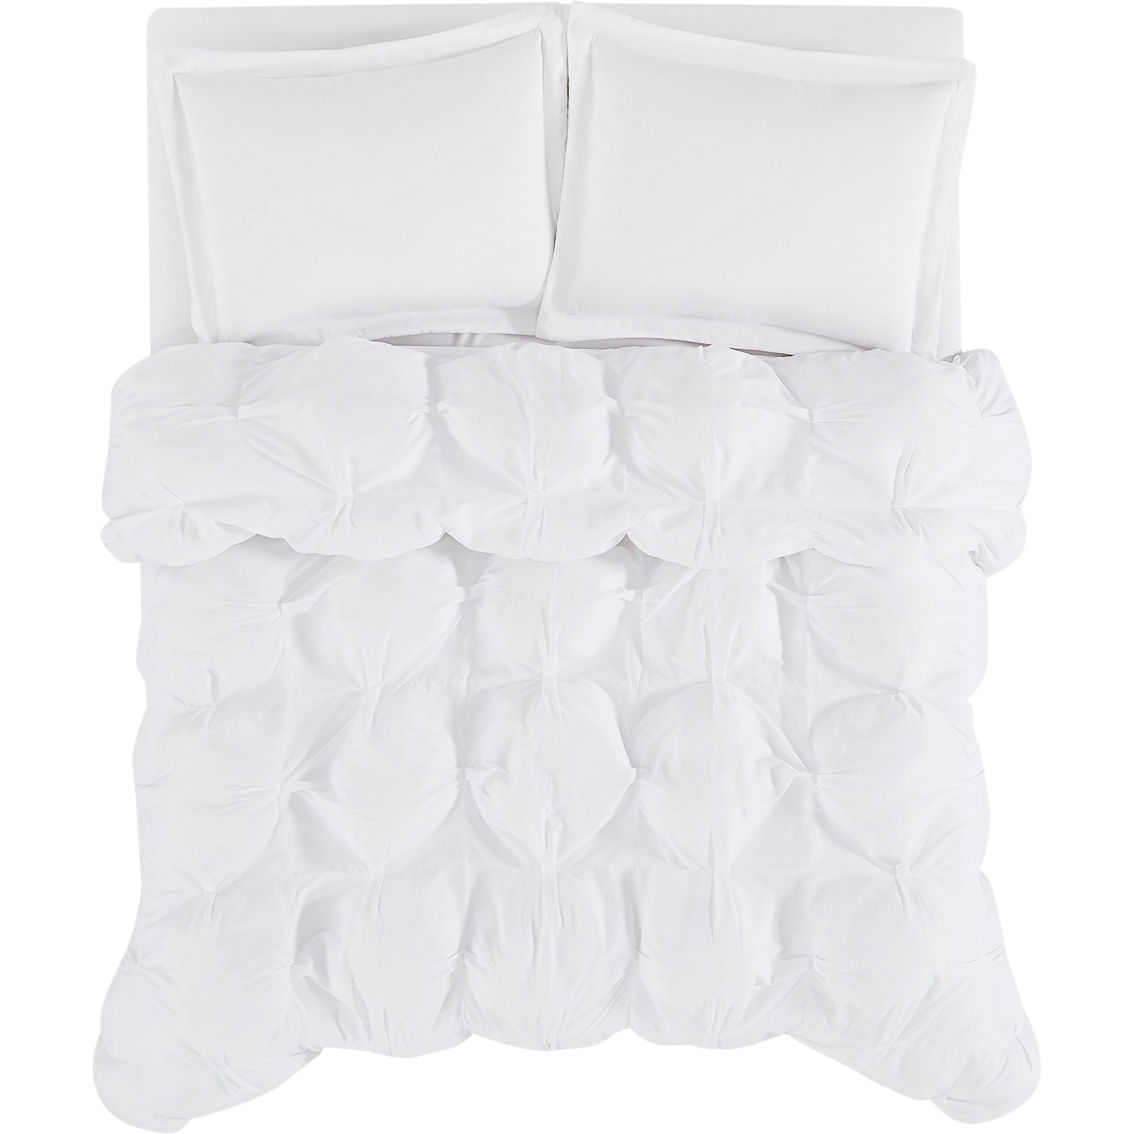 Truly Soft Cloud Puffer Comforter Set - Image 4 of 6